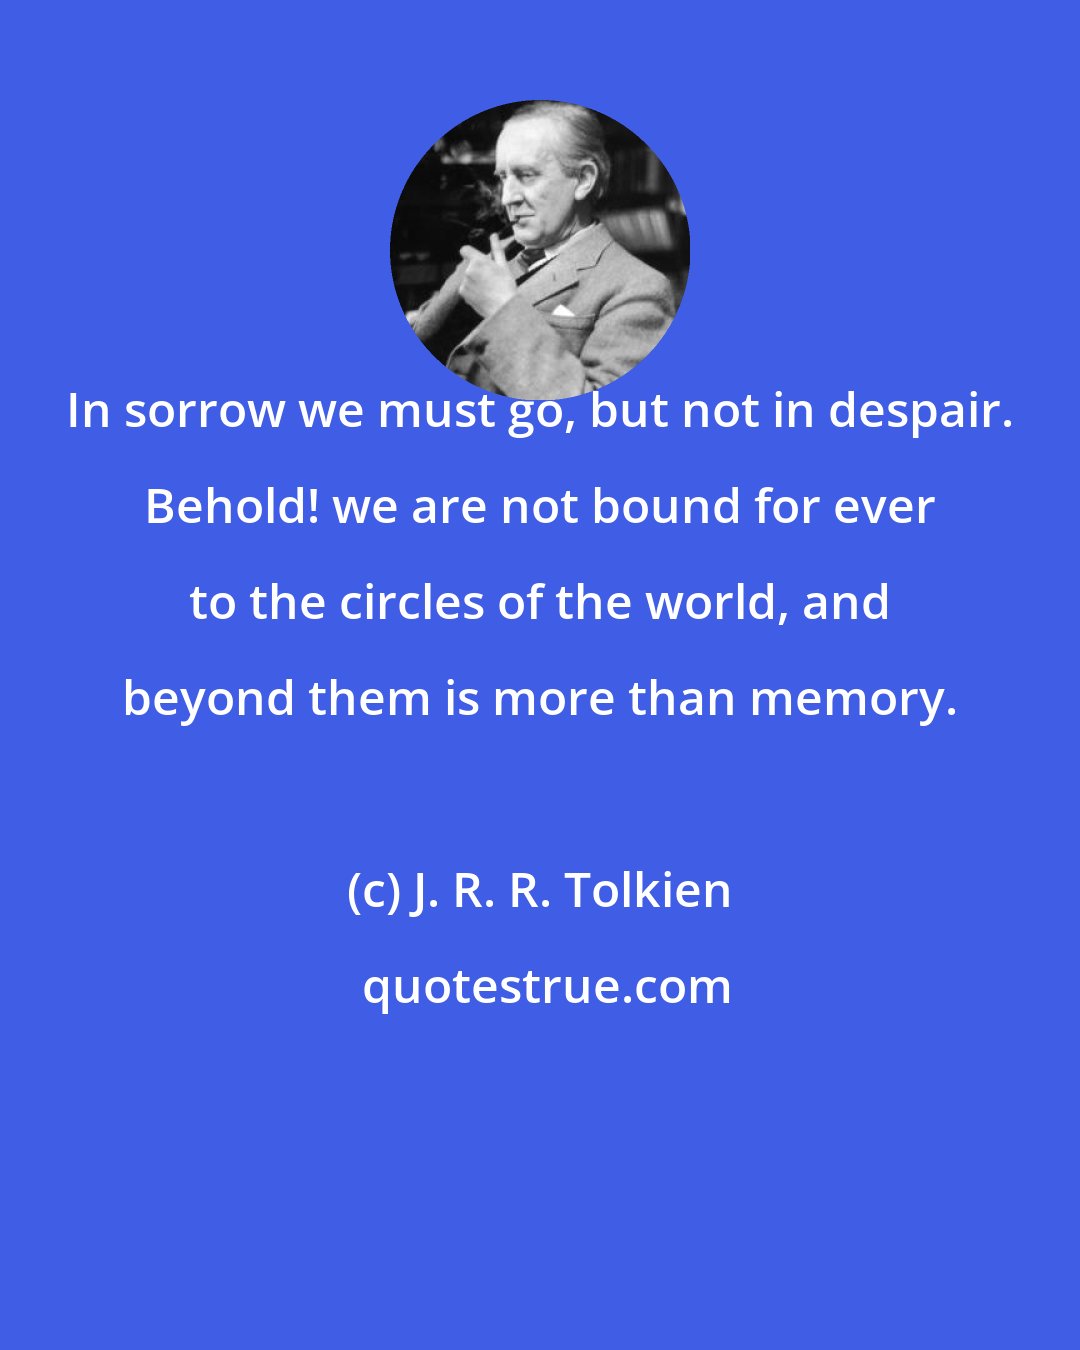 J. R. R. Tolkien: In sorrow we must go, but not in despair. Behold! we are not bound for ever to the circles of the world, and beyond them is more than memory.